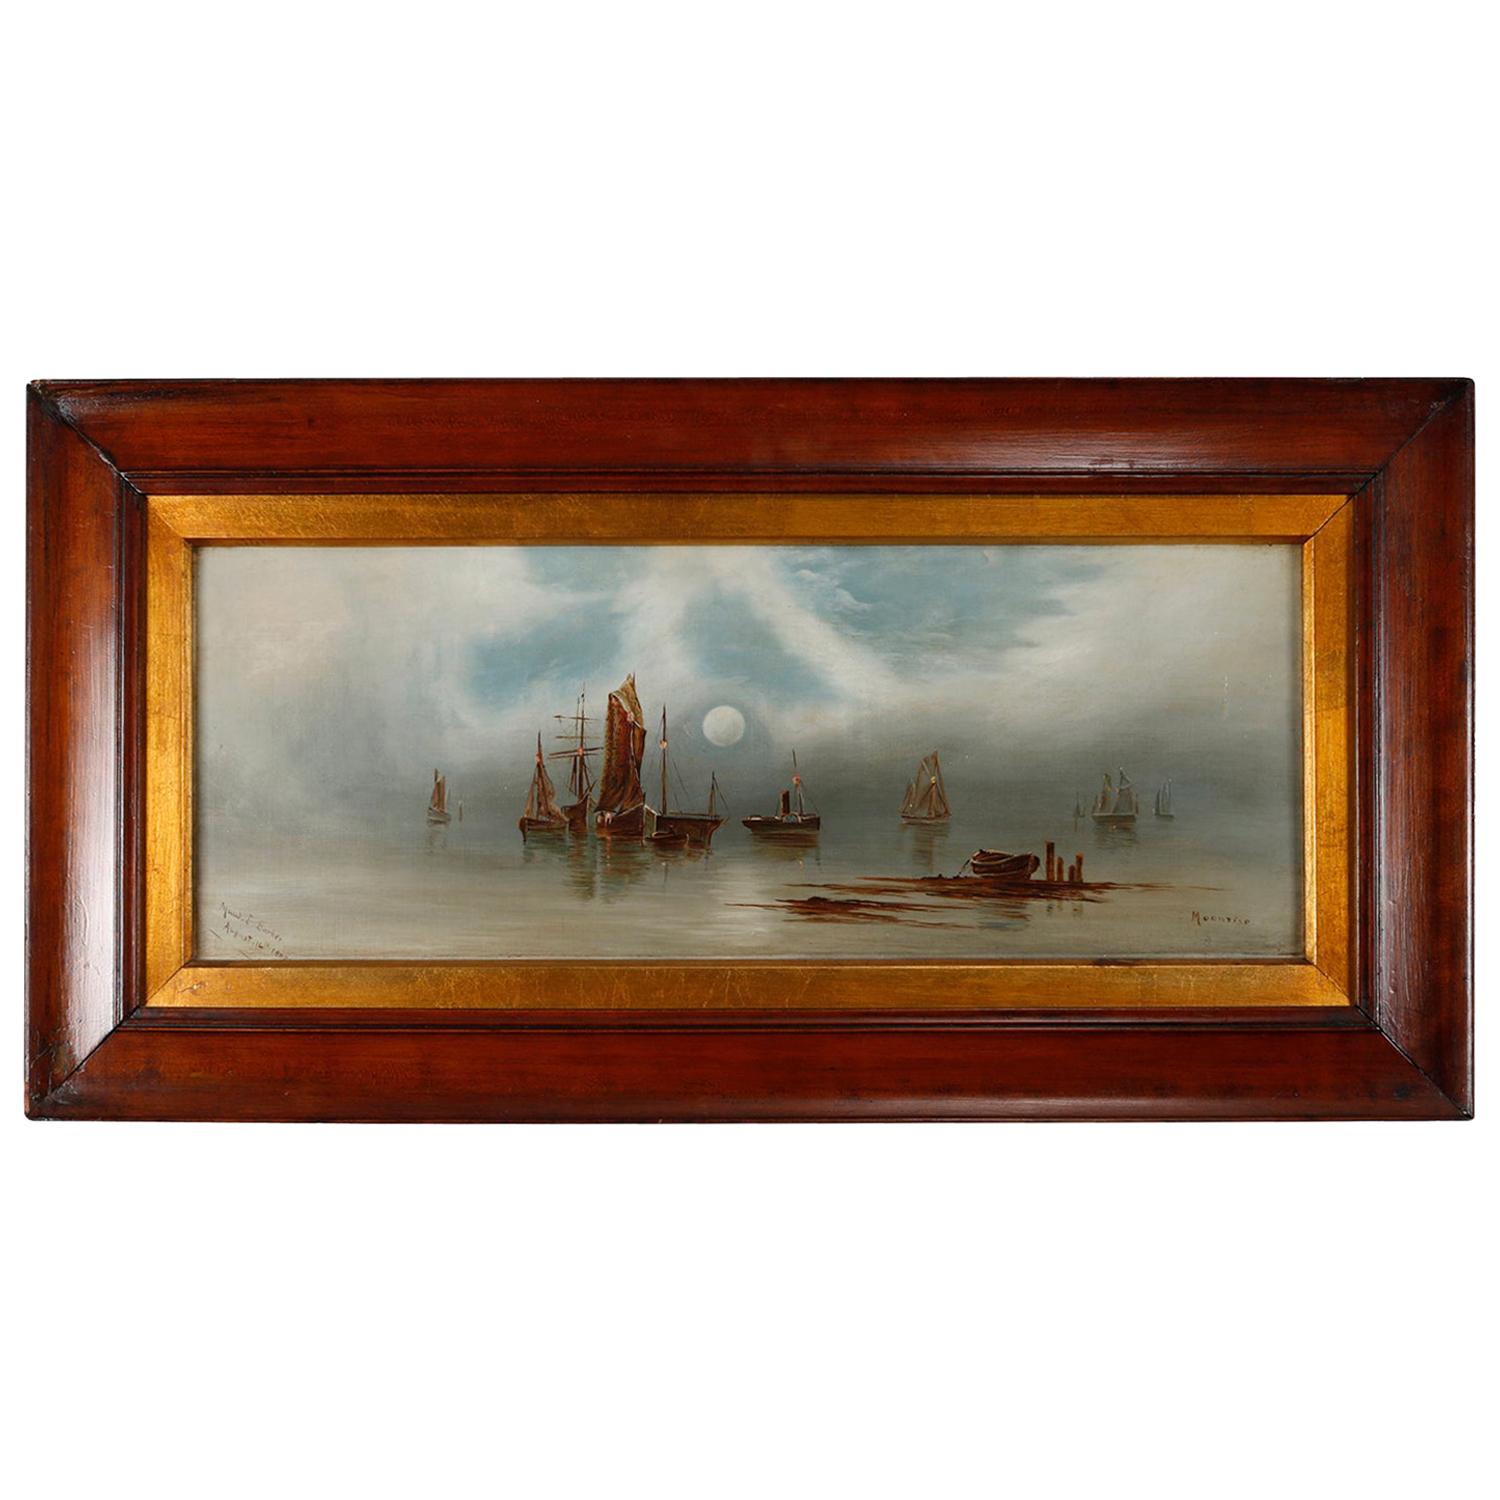 Antique Oil on Canvas Seascapes "Moonrise" by Barker, circa 1900